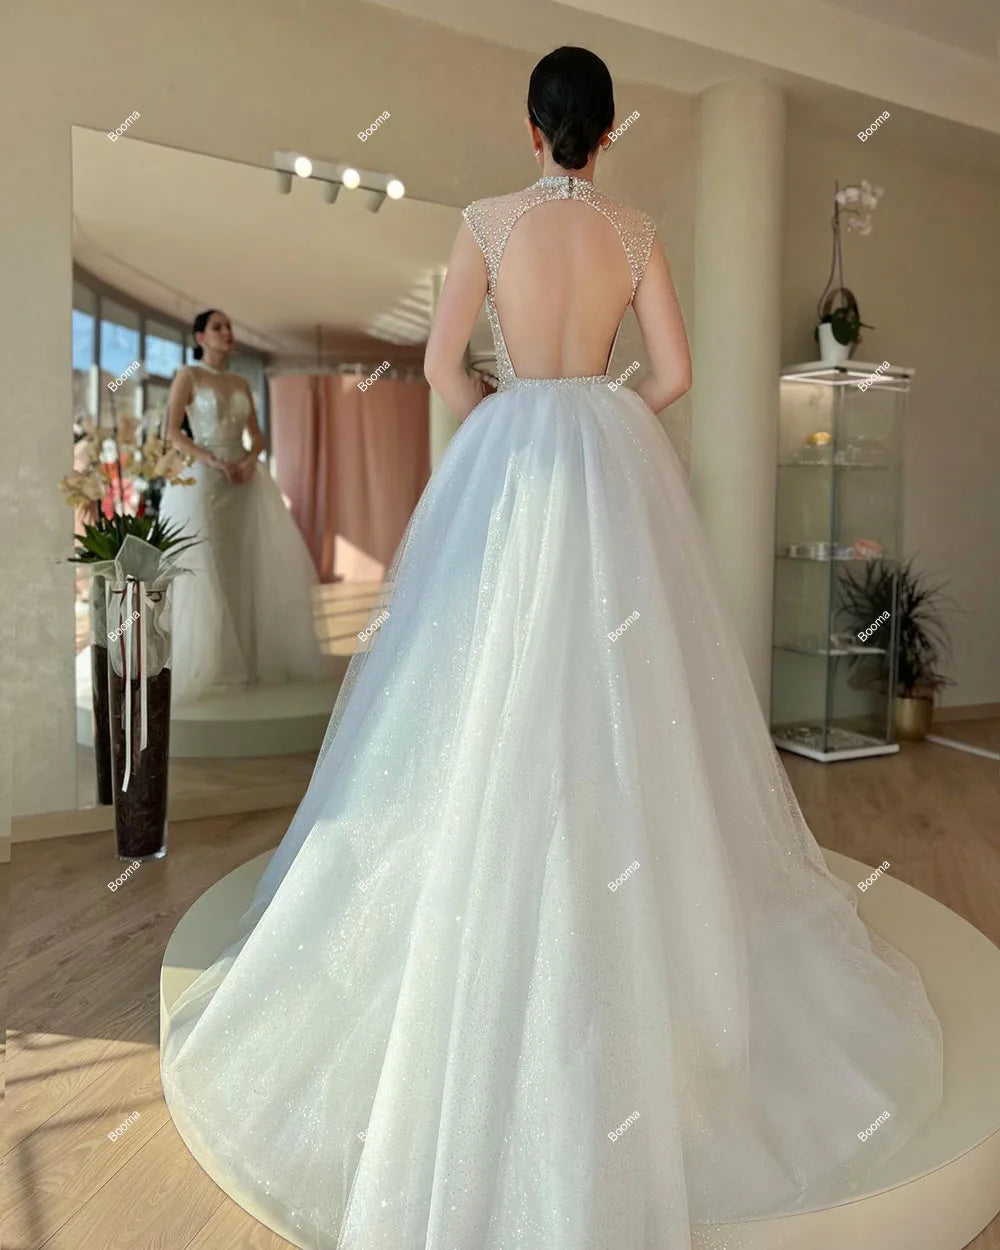 Glitter Elegant Mermaid Wedding Dresses High Neck Backless Bride Party Dresses for Women Bridals Prom Dresses with Train